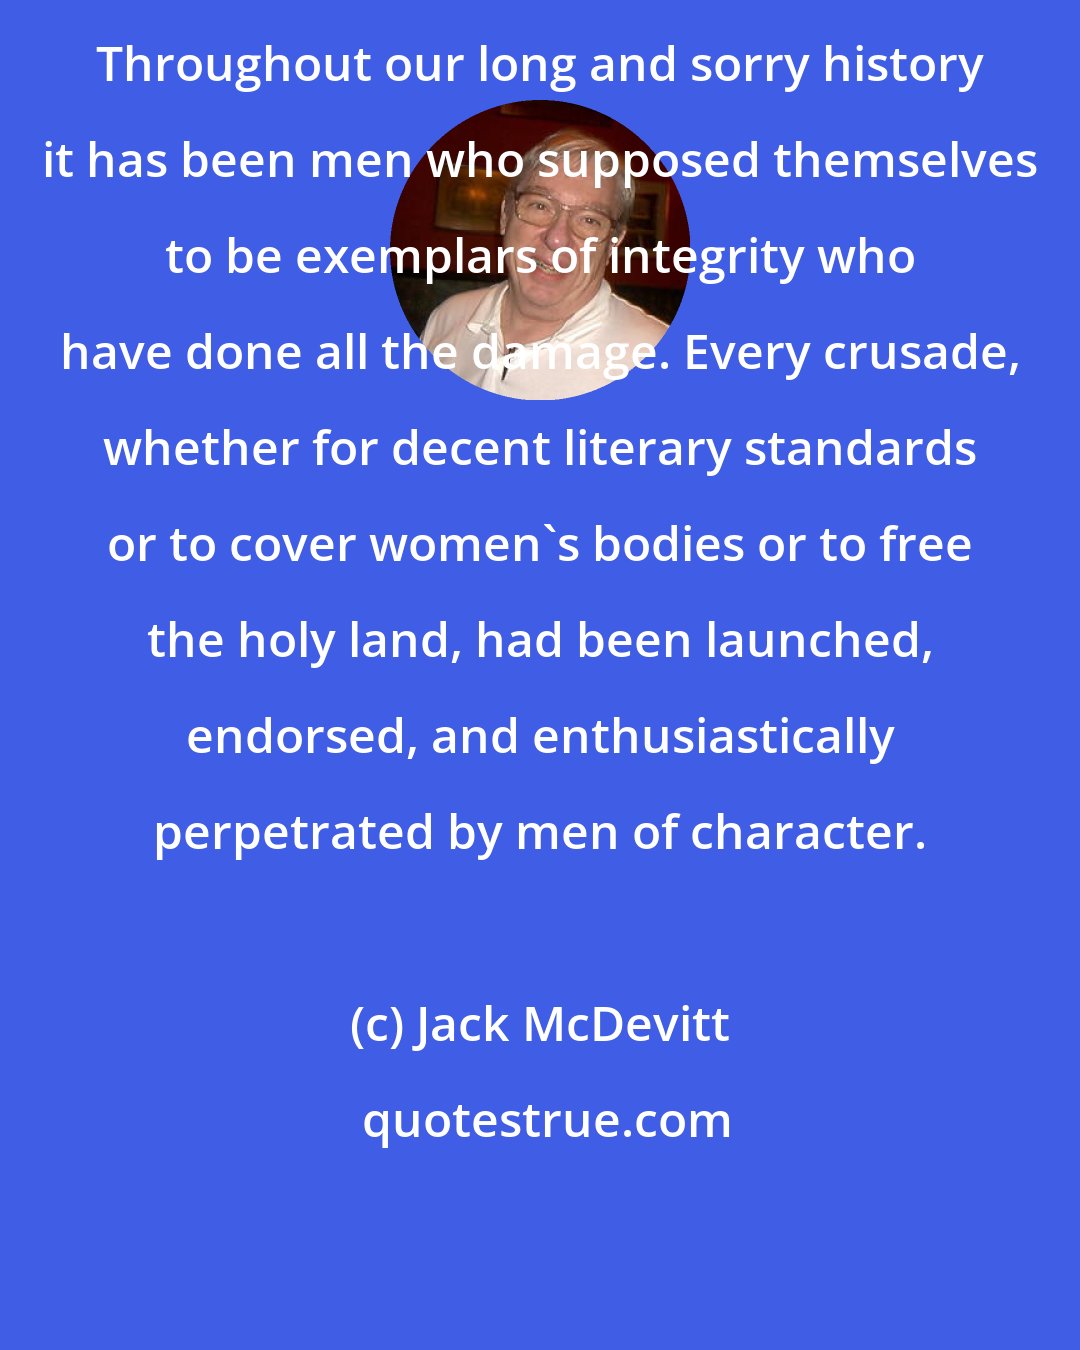 Jack McDevitt: Throughout our long and sorry history it has been men who supposed themselves to be exemplars of integrity who have done all the damage. Every crusade, whether for decent literary standards or to cover women's bodies or to free the holy land, had been launched, endorsed, and enthusiastically perpetrated by men of character.